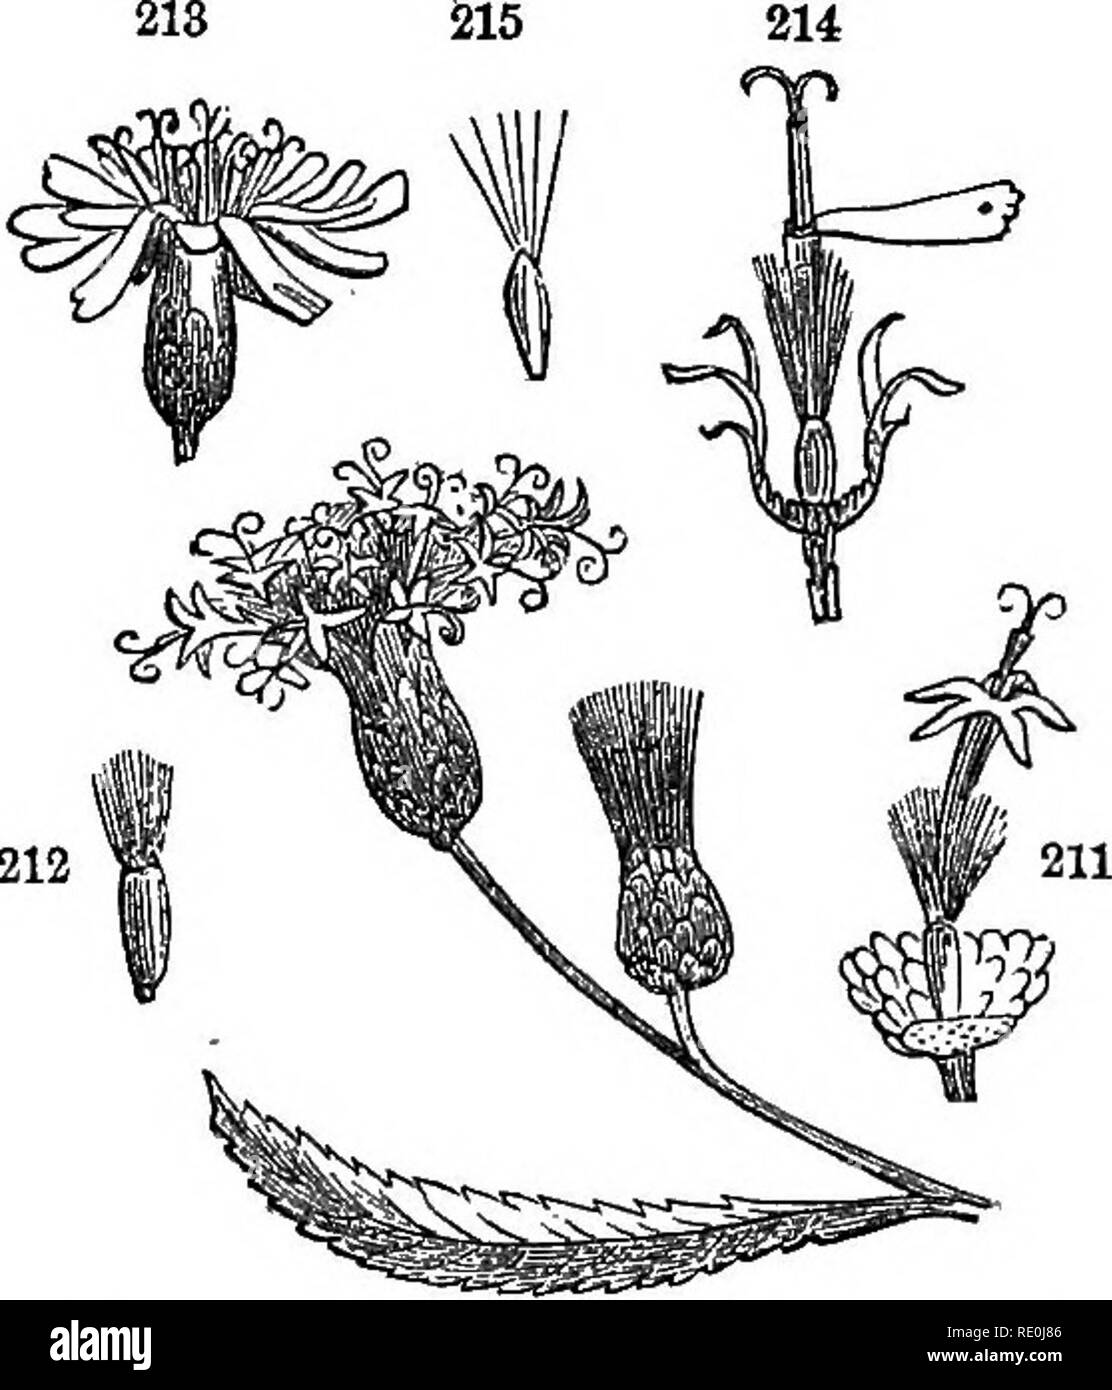 . Class-book of botany : being outlines of the structure, physiology and classification of plants : with a flora of the United States and Canada . Botany; Botany; Botany. INFLORSBCENCE. 73 themselves umbels, as in caraway and most of the Umbeliferse, a com- pound umbel is produced. Such secondary umbels are called umbellets and the primary pedicels, rays. ^ 352. The panicle is a compound inflorescence formed by the irregu- lar branching of the pedicels of the raceme, as in oats, spear-grass, Catalpa. X' 353. A THYKSE is a sort of compact, oblong, or pyramidal panicle, as in lilac, grape. 354.  Stock Photo